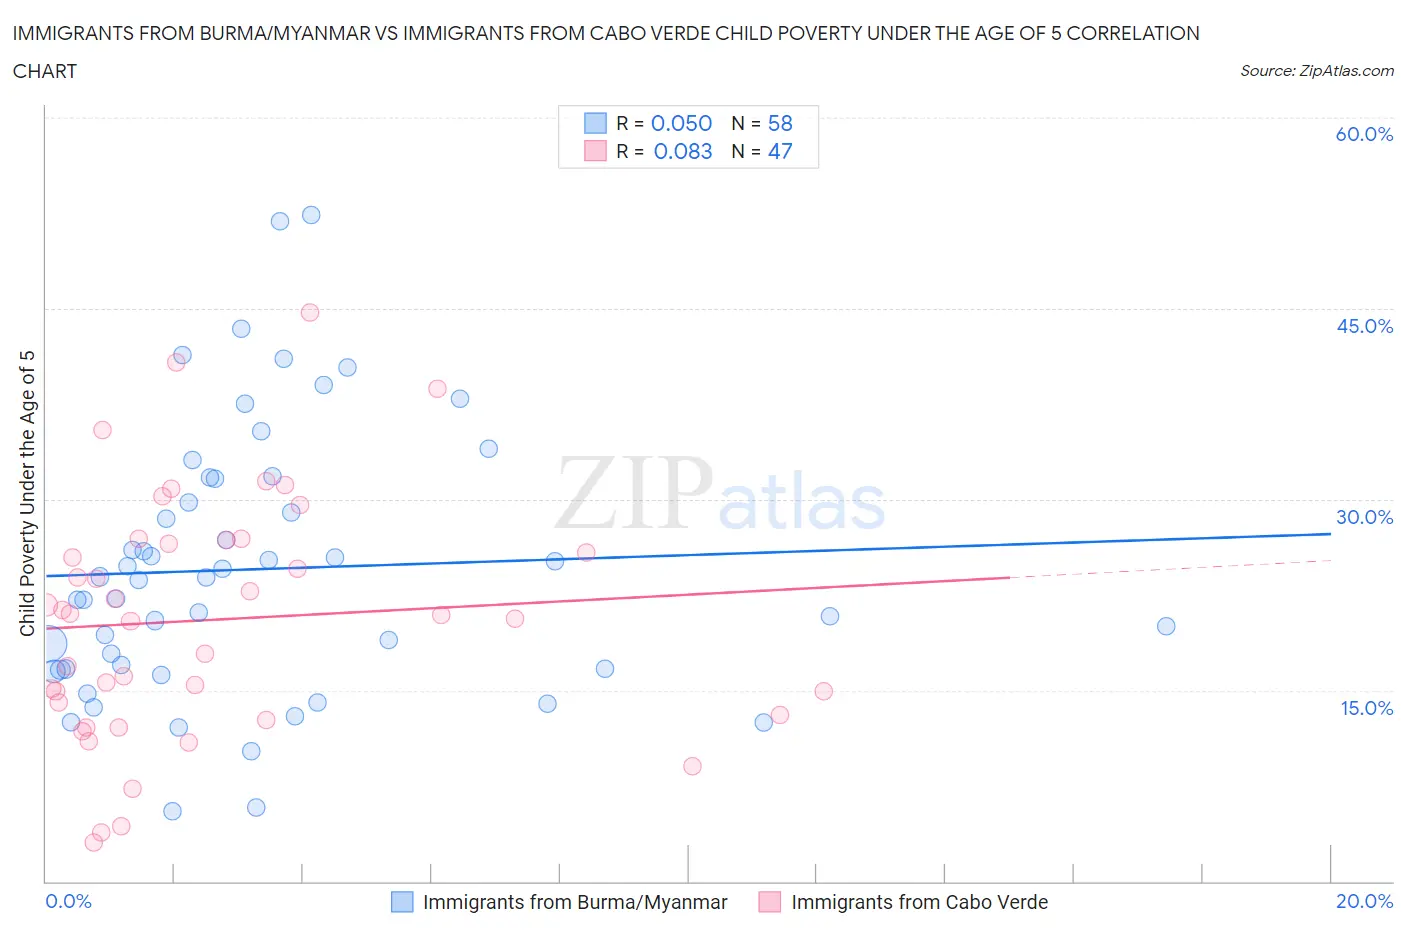 Immigrants from Burma/Myanmar vs Immigrants from Cabo Verde Child Poverty Under the Age of 5